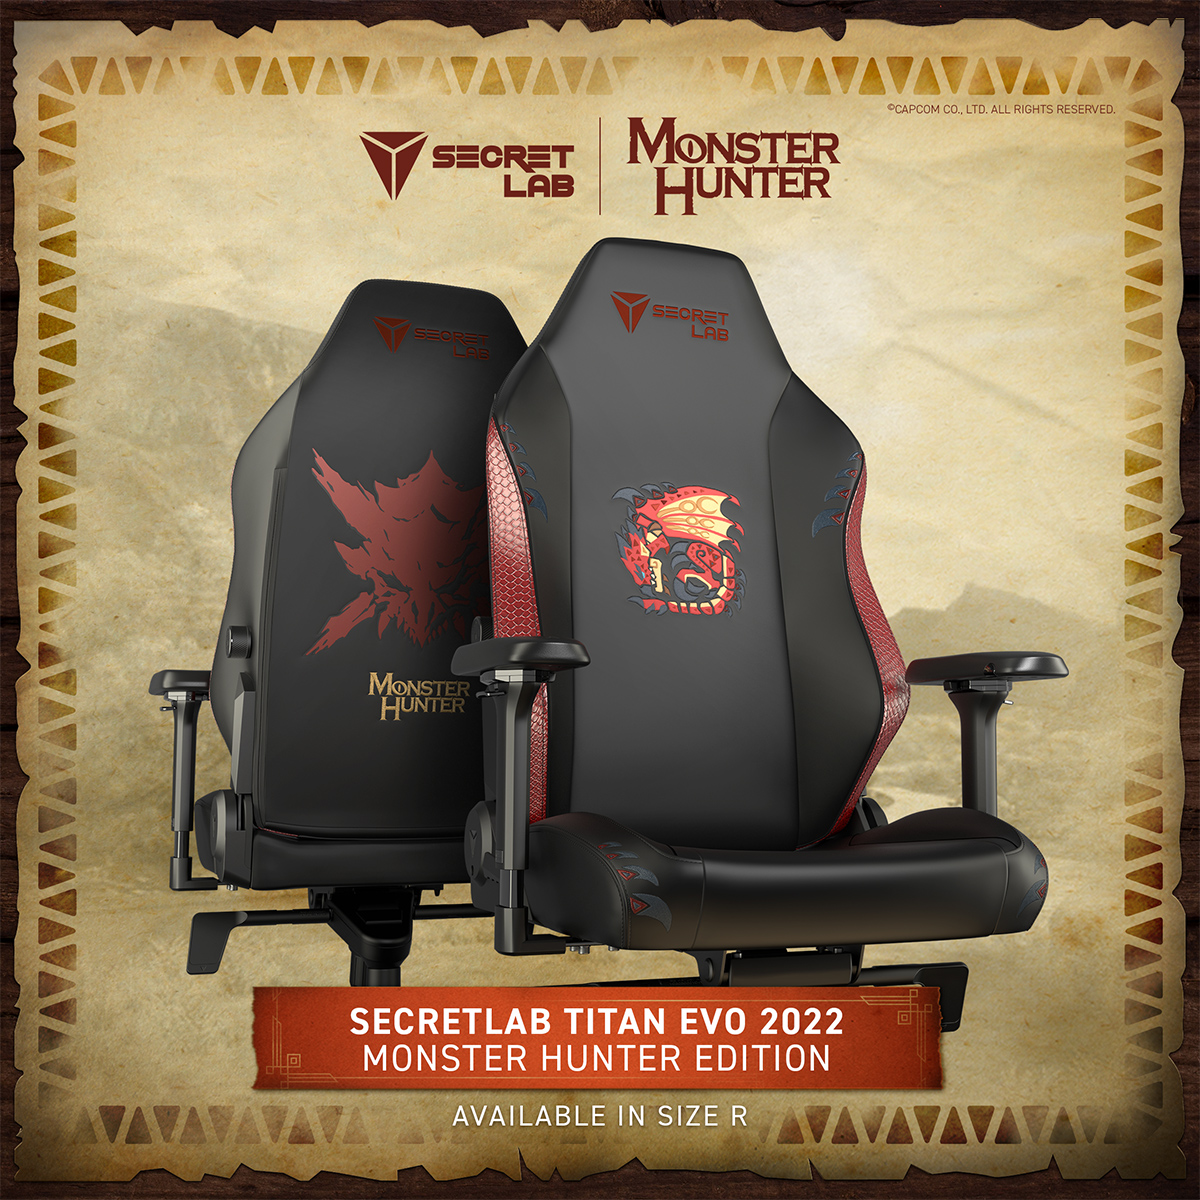 Complete your Rathalos set with the Secretlab Monster Hunter Edition chair, designed in collaboration with gaming pioneer Capcom